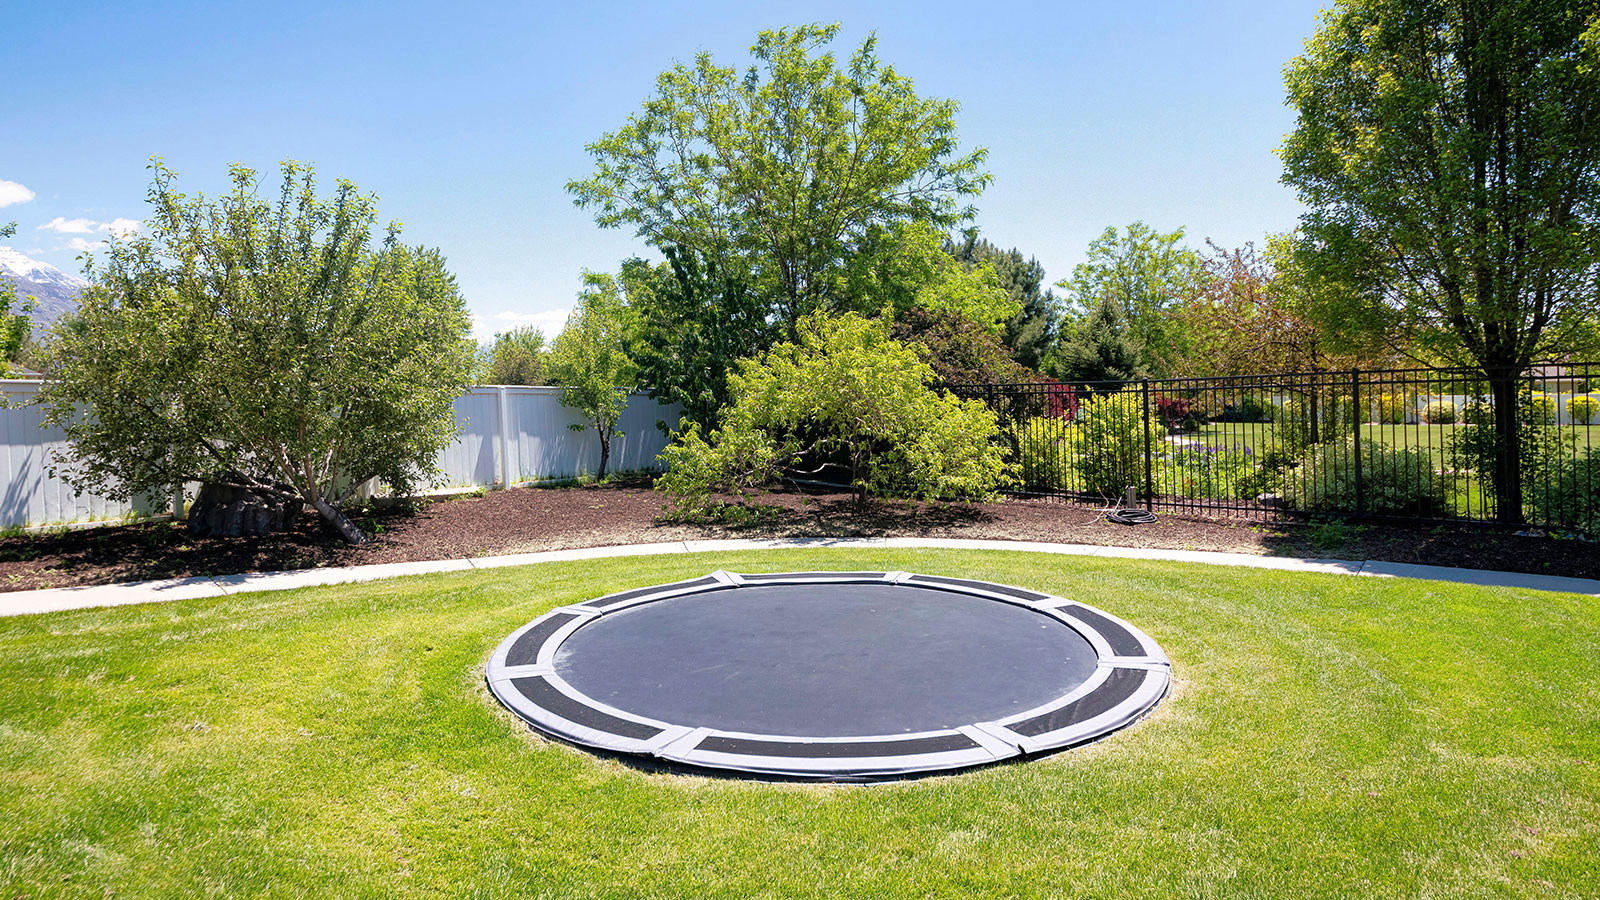 Are in-ground trampolines safe? the know